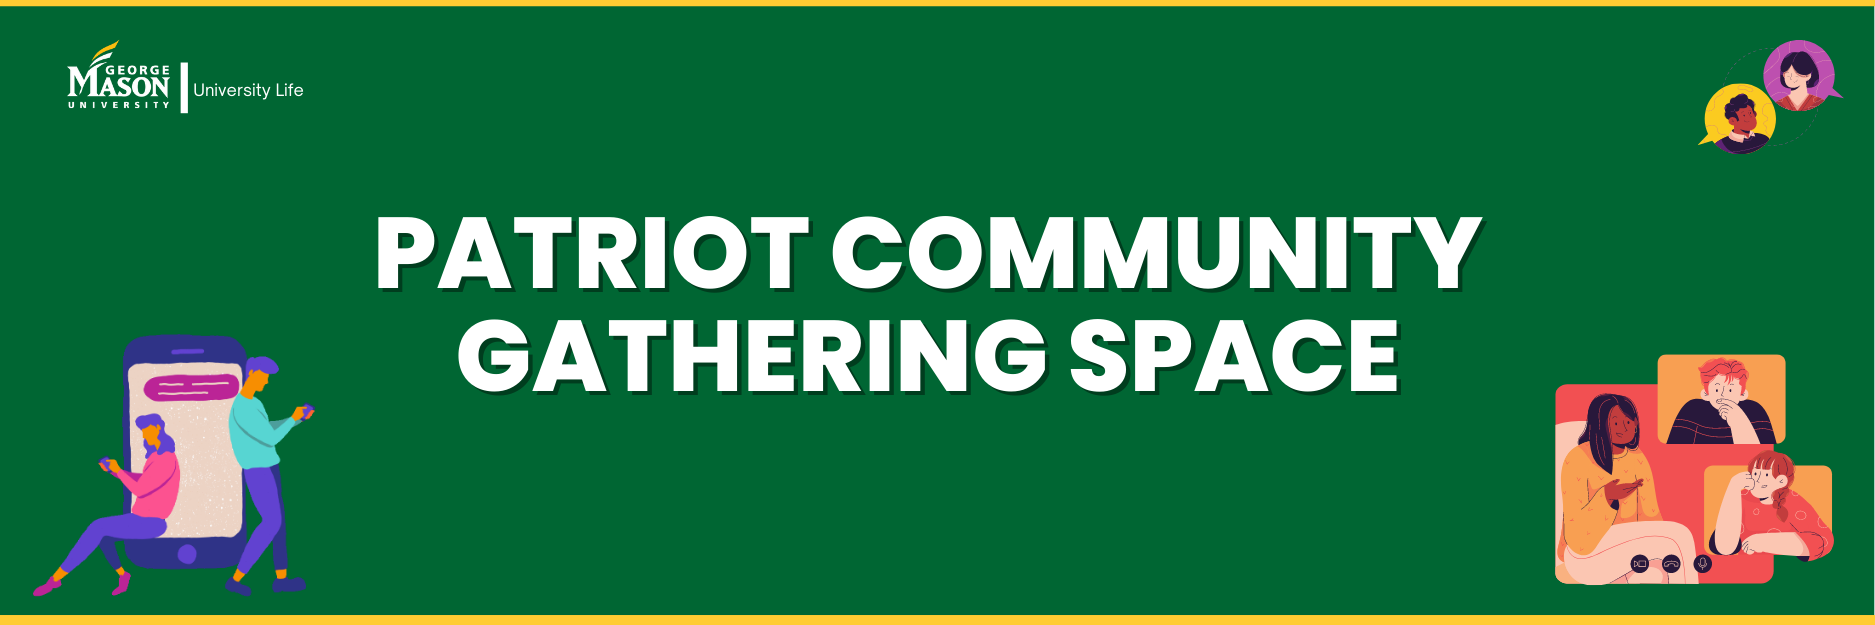 Patriot gathering spaces to support and connect for well-being needs